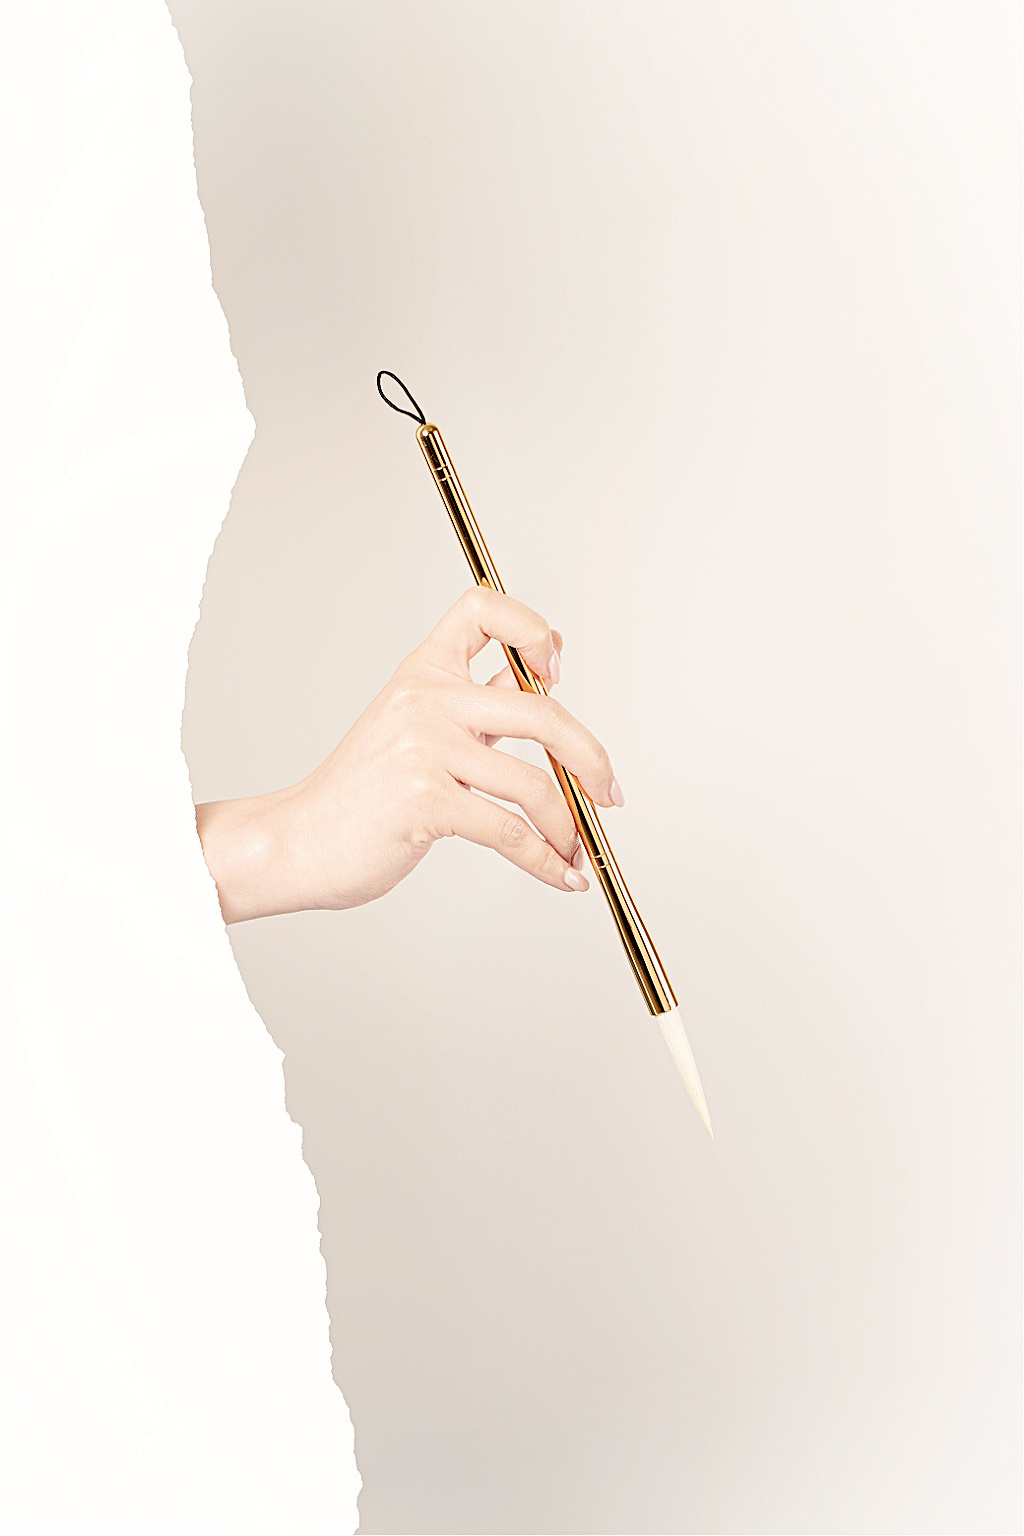 A hand writing a minimalist shopping list with a gold pen